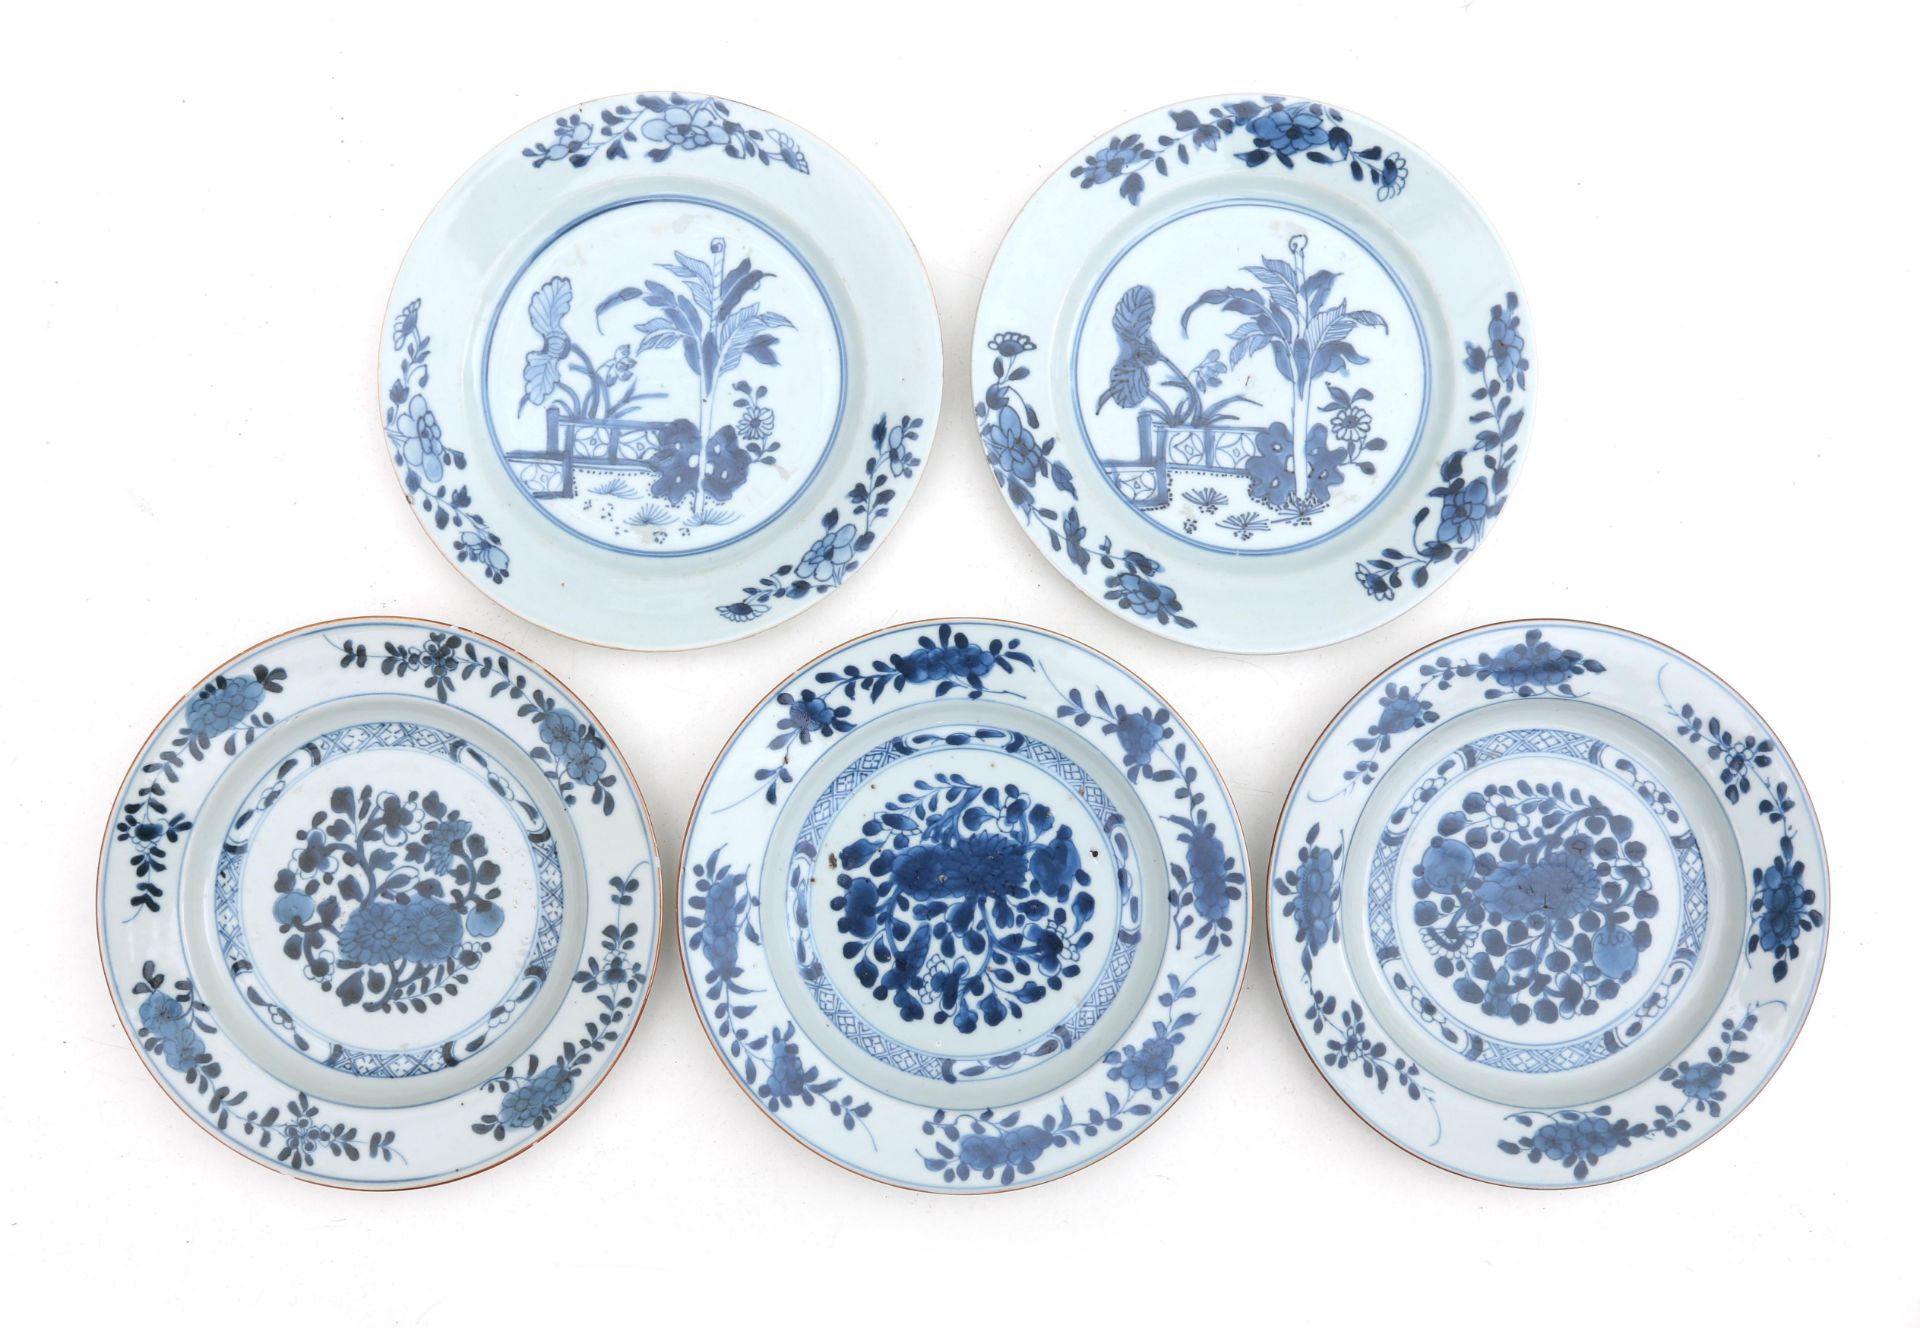 Three Chinese porcelain plates with blue and white foliate decoration, and two plates with tobacco